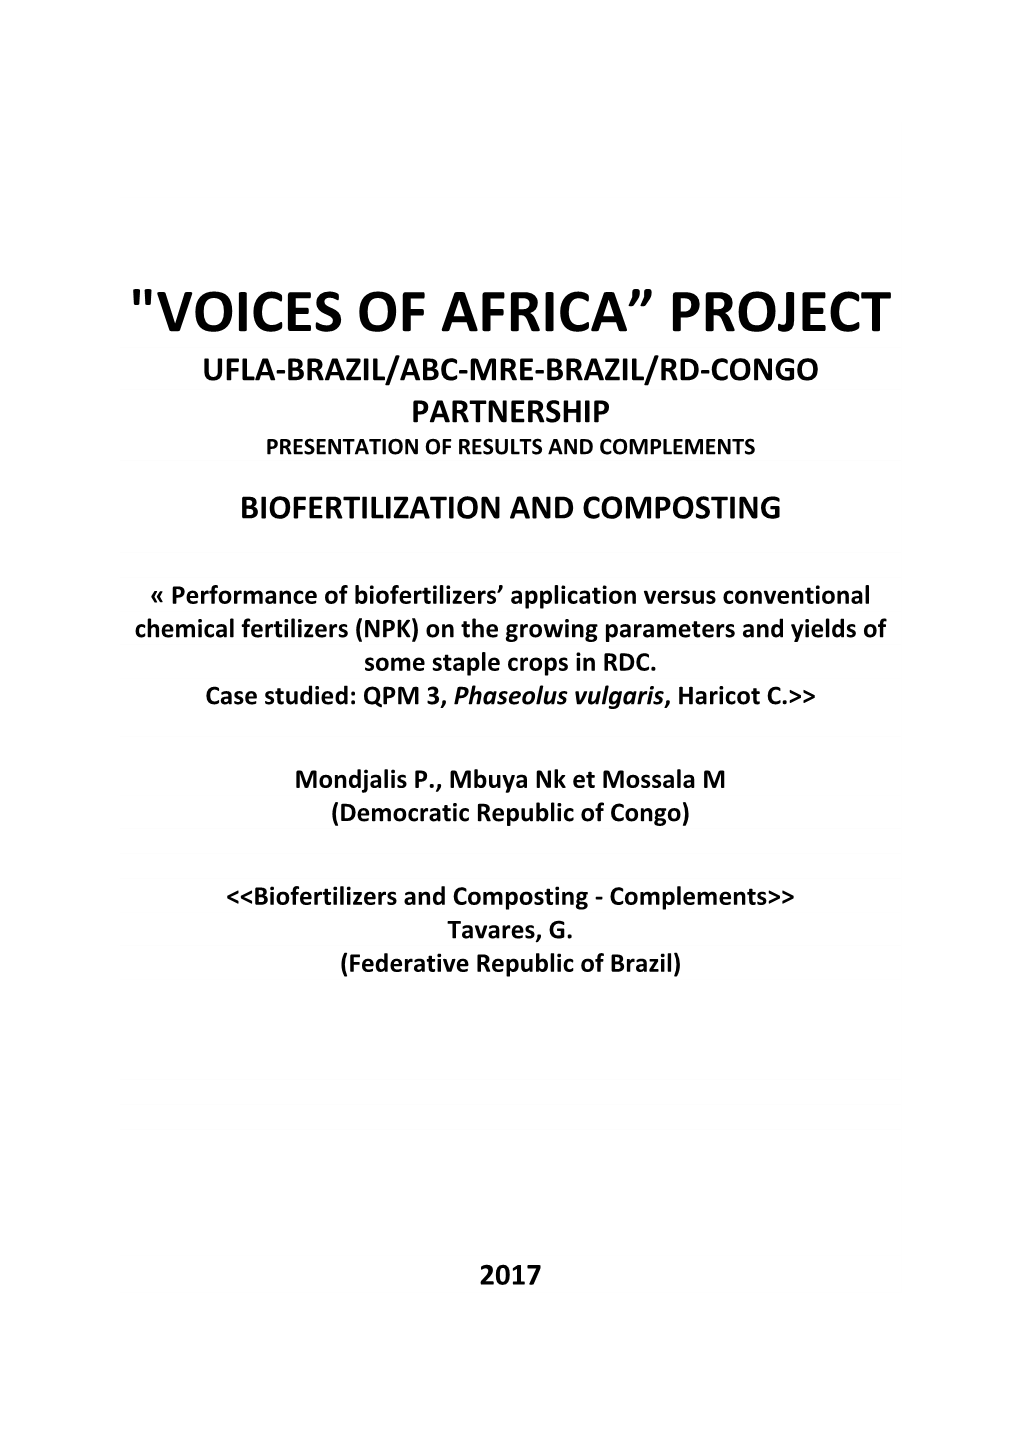 "Voices of Africa” Project Ufla-Brazil/Abc-Mre-Brazil/Rd-Congo Partnership Presentation of Results and Complements